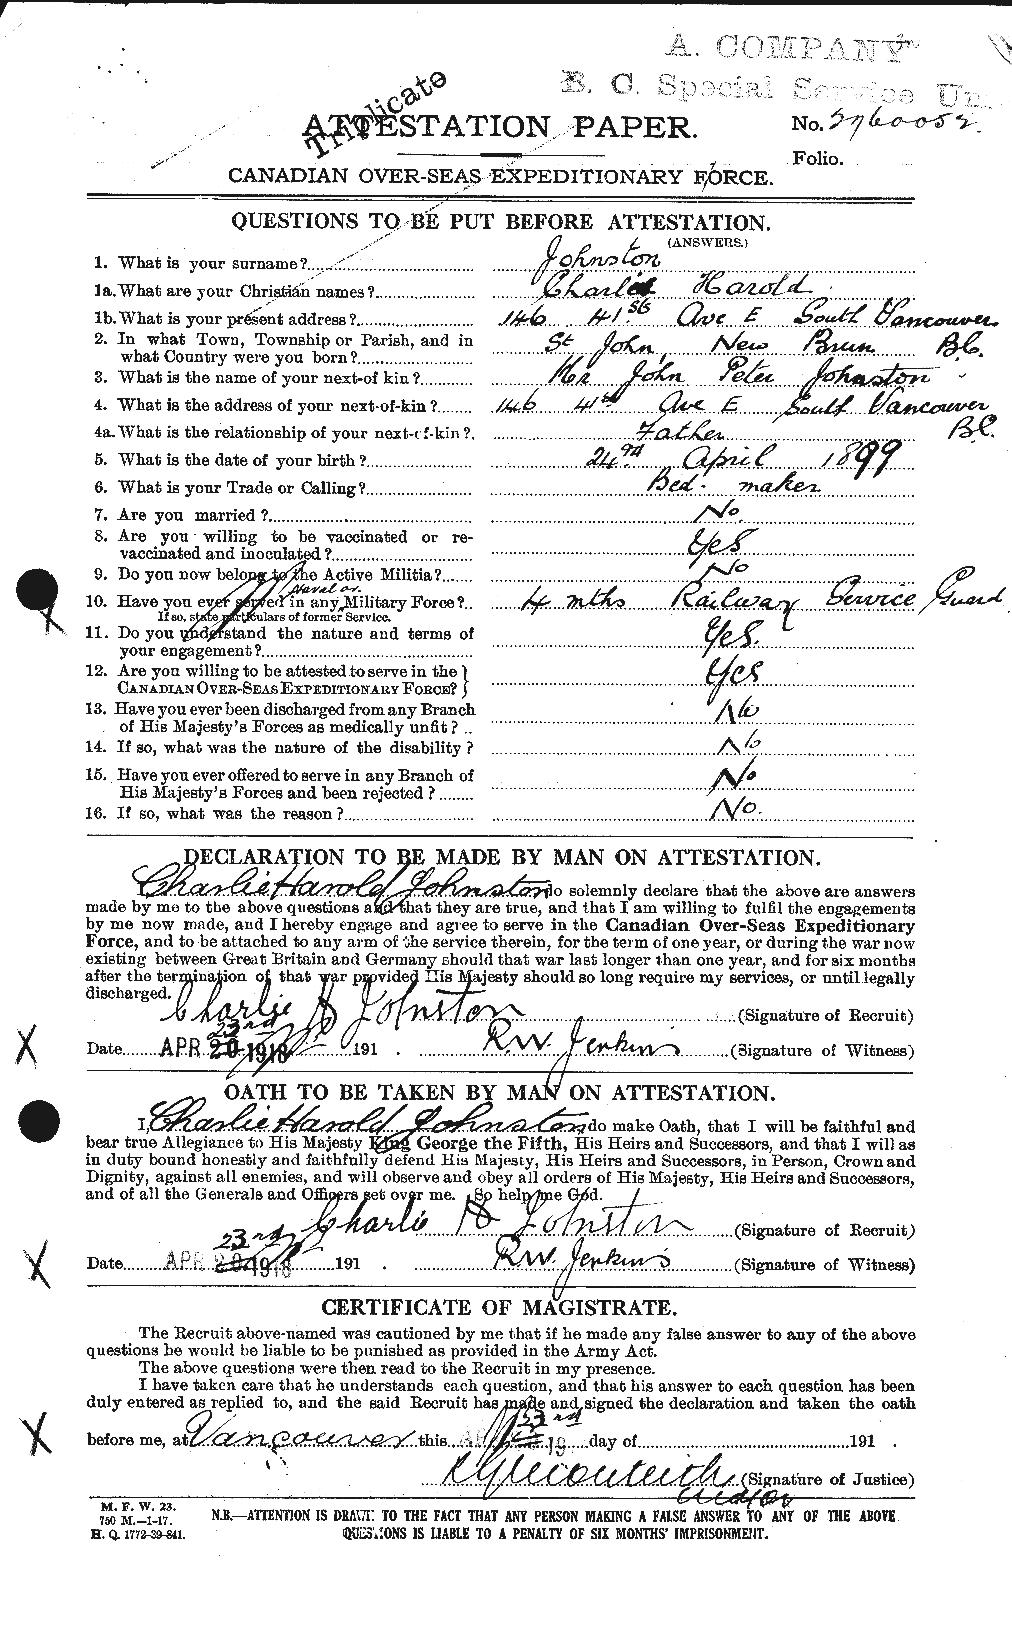 Personnel Records of the First World War - CEF 423125a